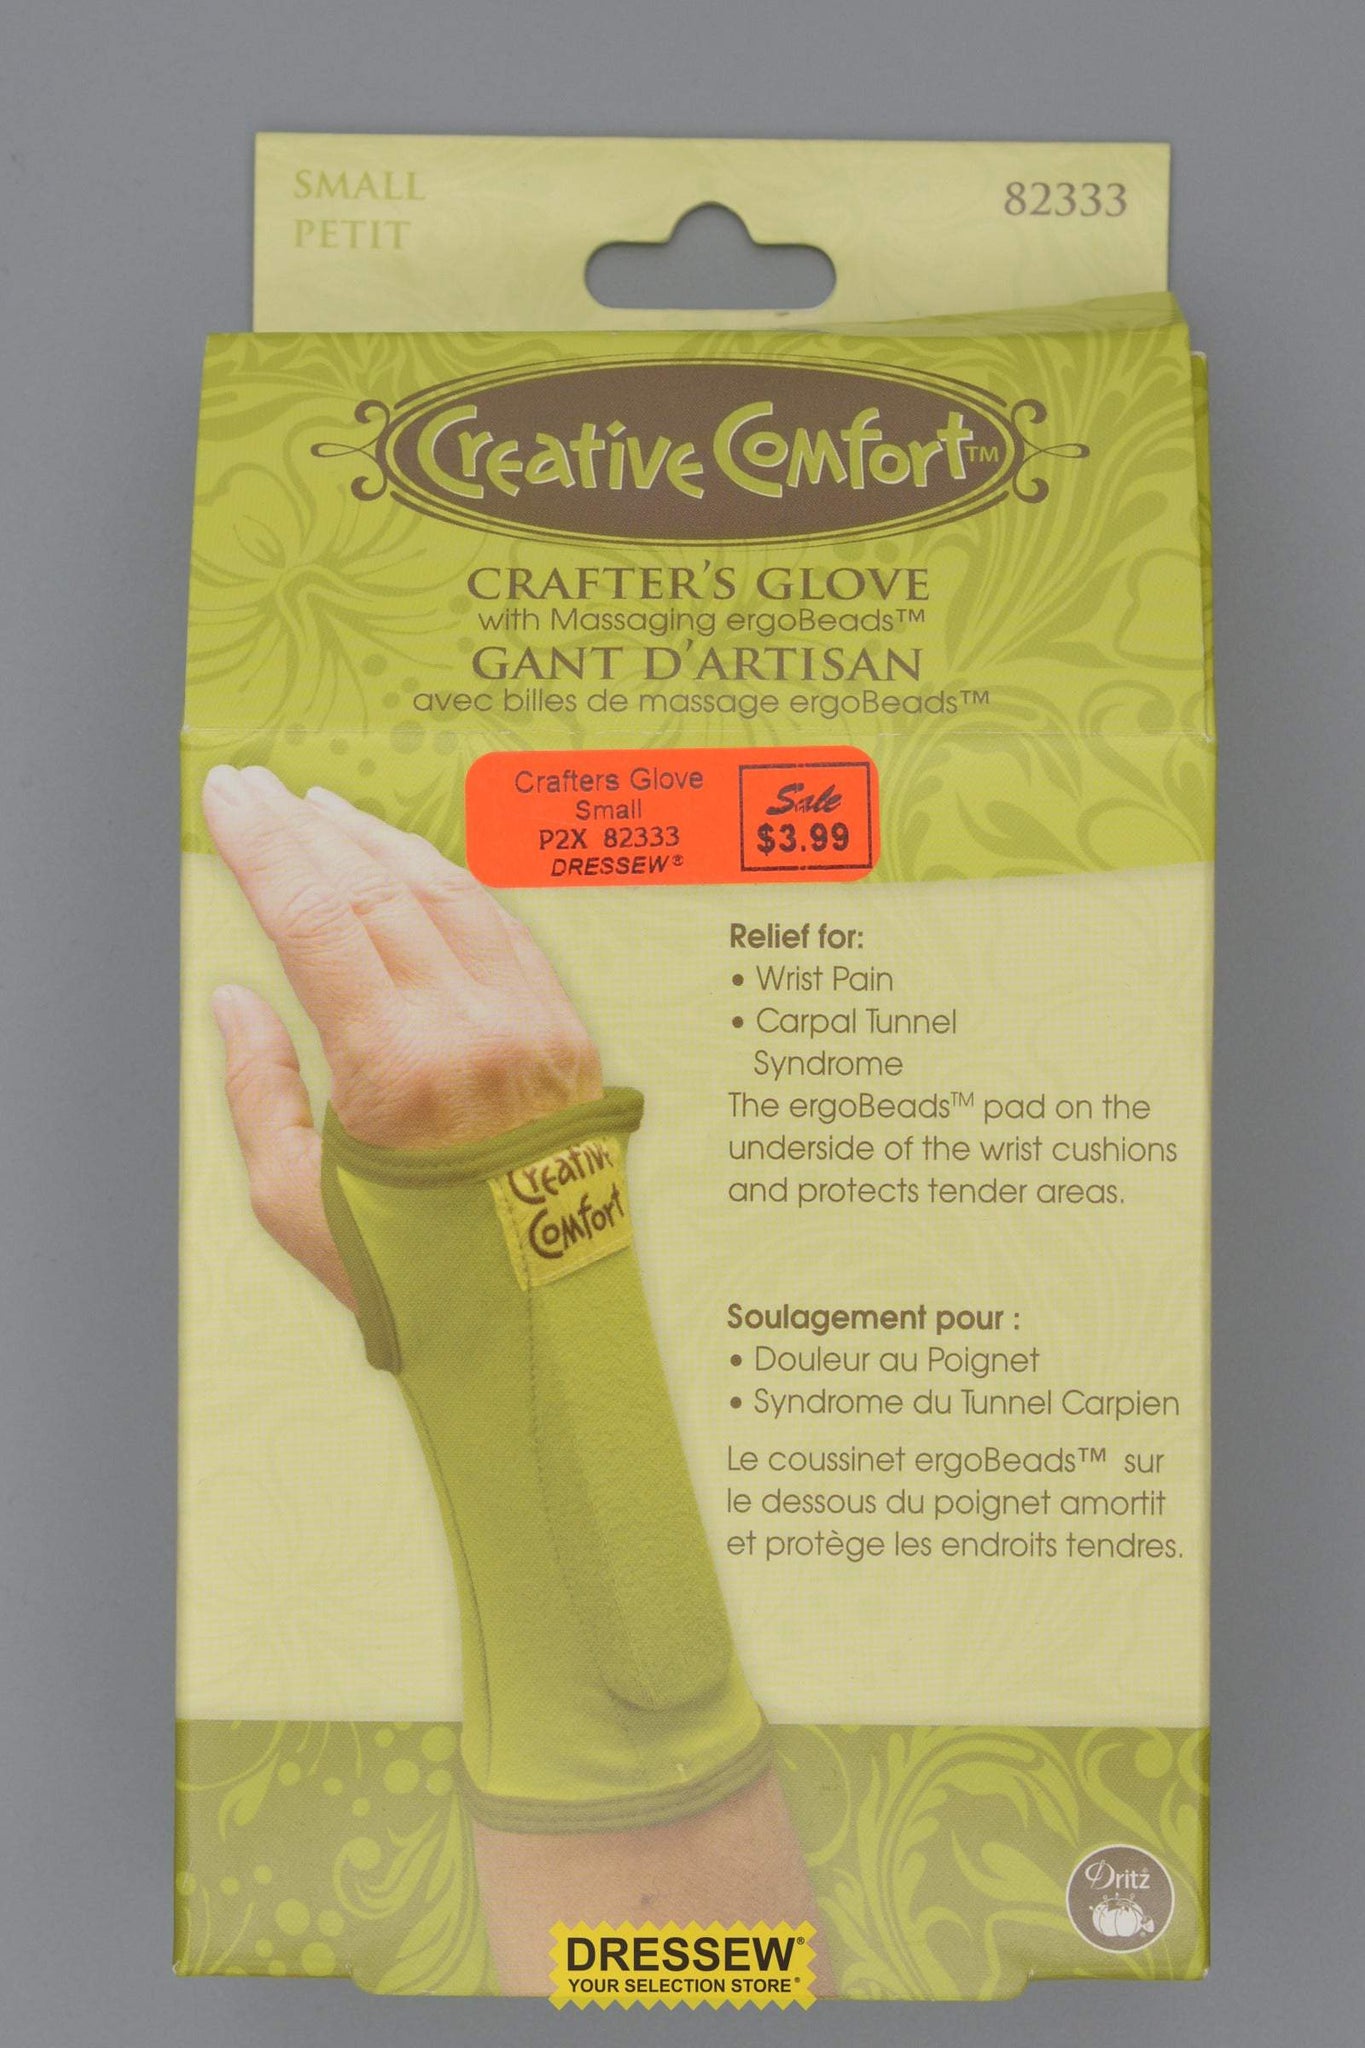 Crafter's Glove Small